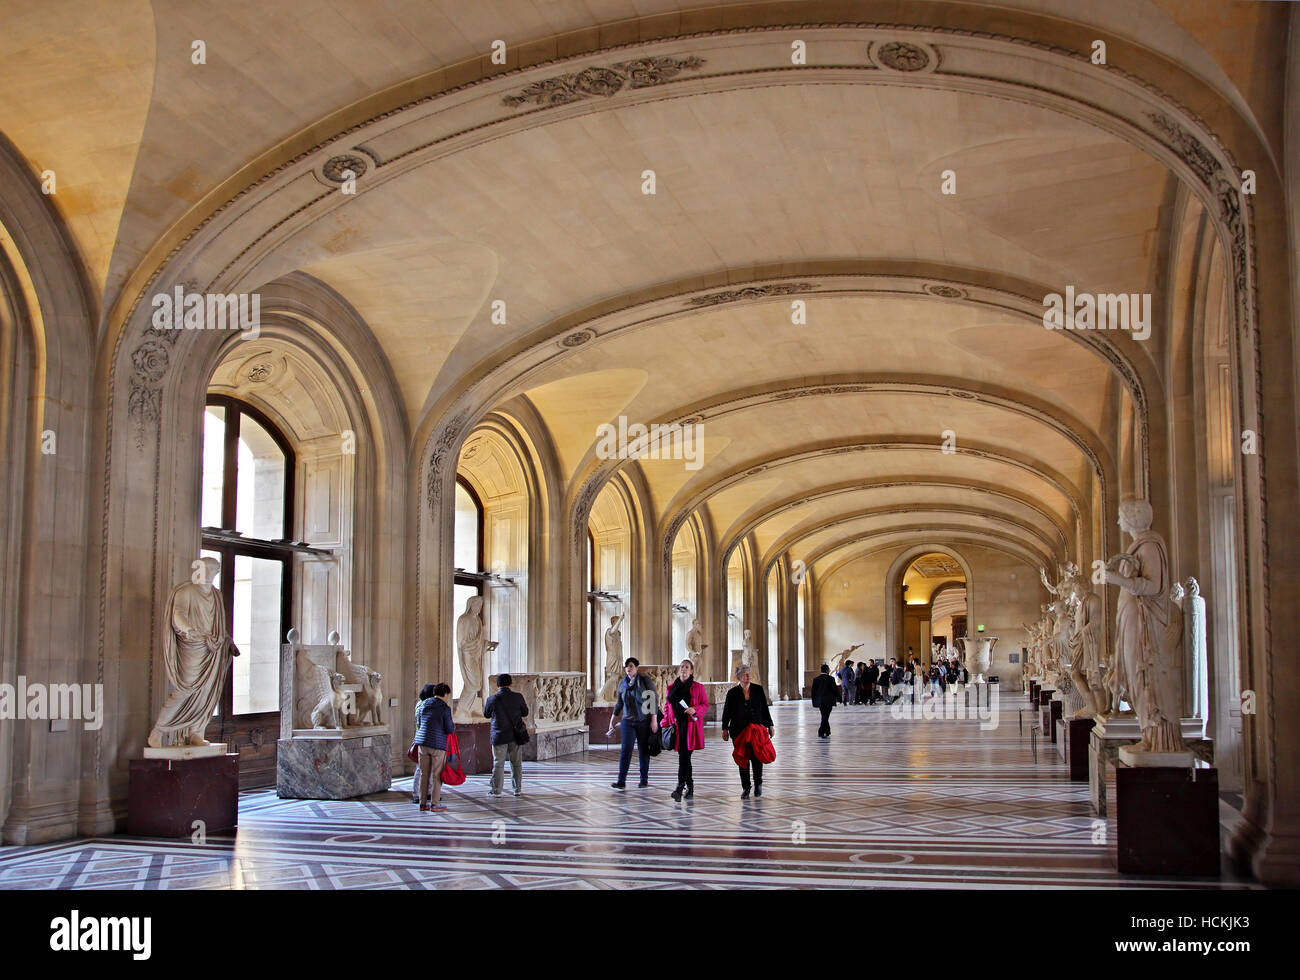 One of the halls of the Denon wing in Louvre museum  dedicated to sculpture. Paris, France. Stock Photo